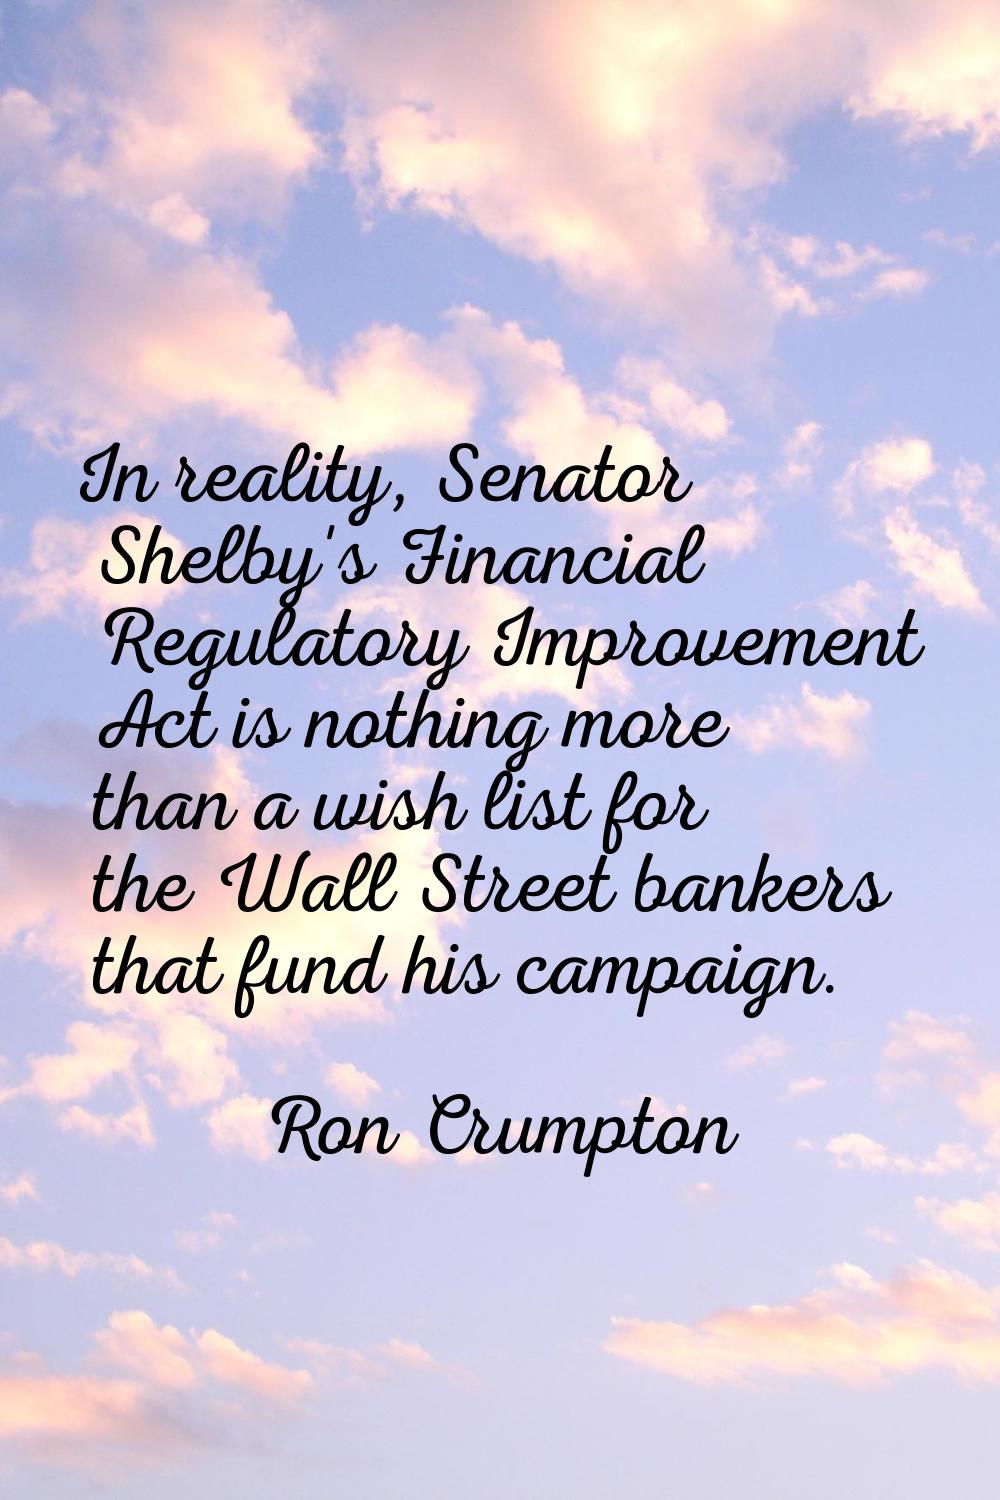 In reality, Senator Shelby's Financial Regulatory Improvement Act is nothing more than a wish list 